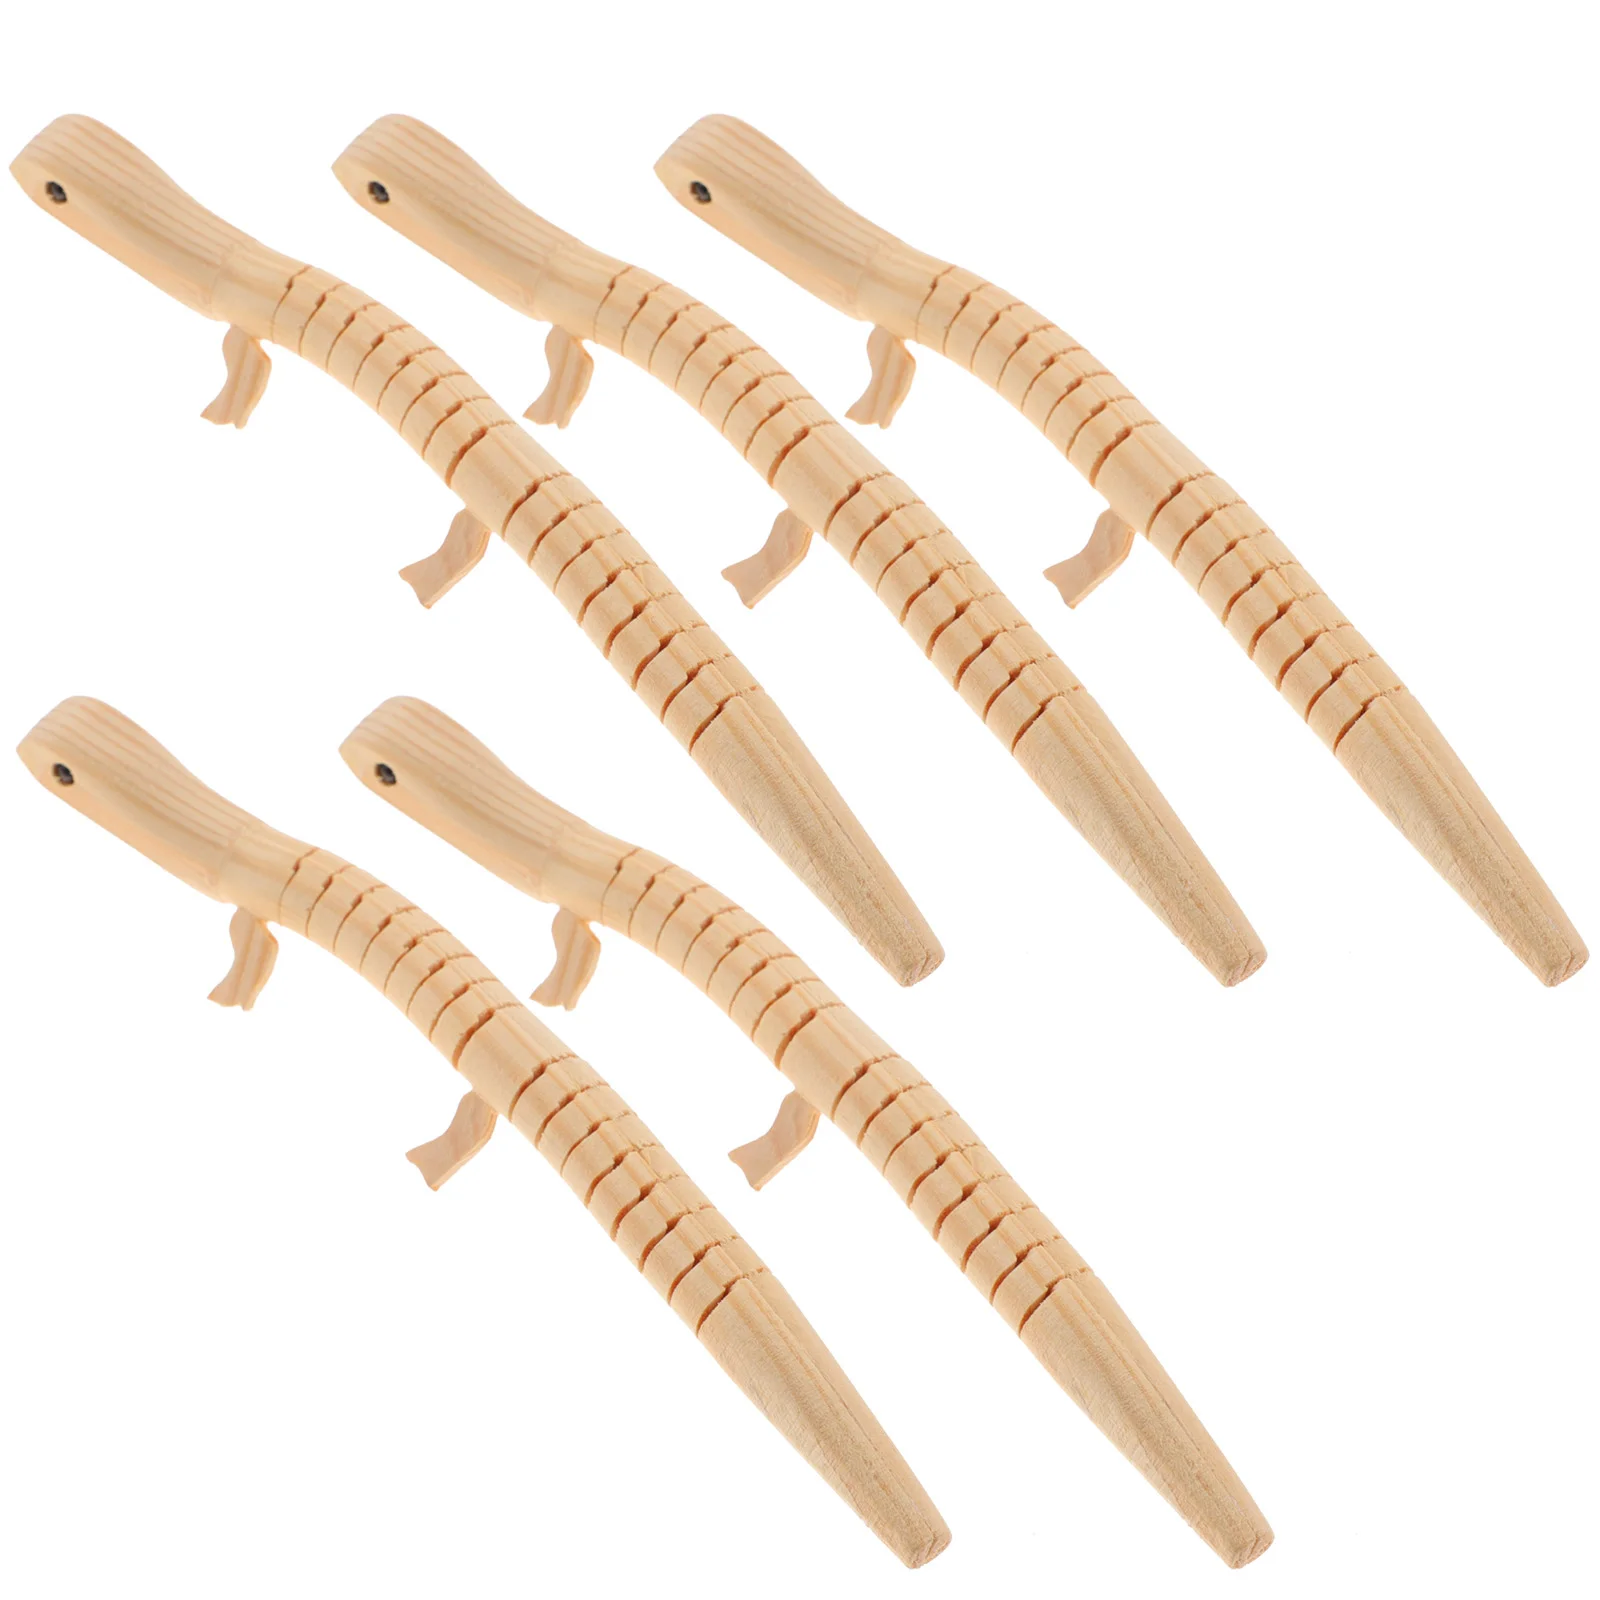 

5 Pcs Children Toys Realistic Lizard Plaything Small Wood Wooden Learning Snake DIY Lovely Kids Wiggle Unfinished Model Blank